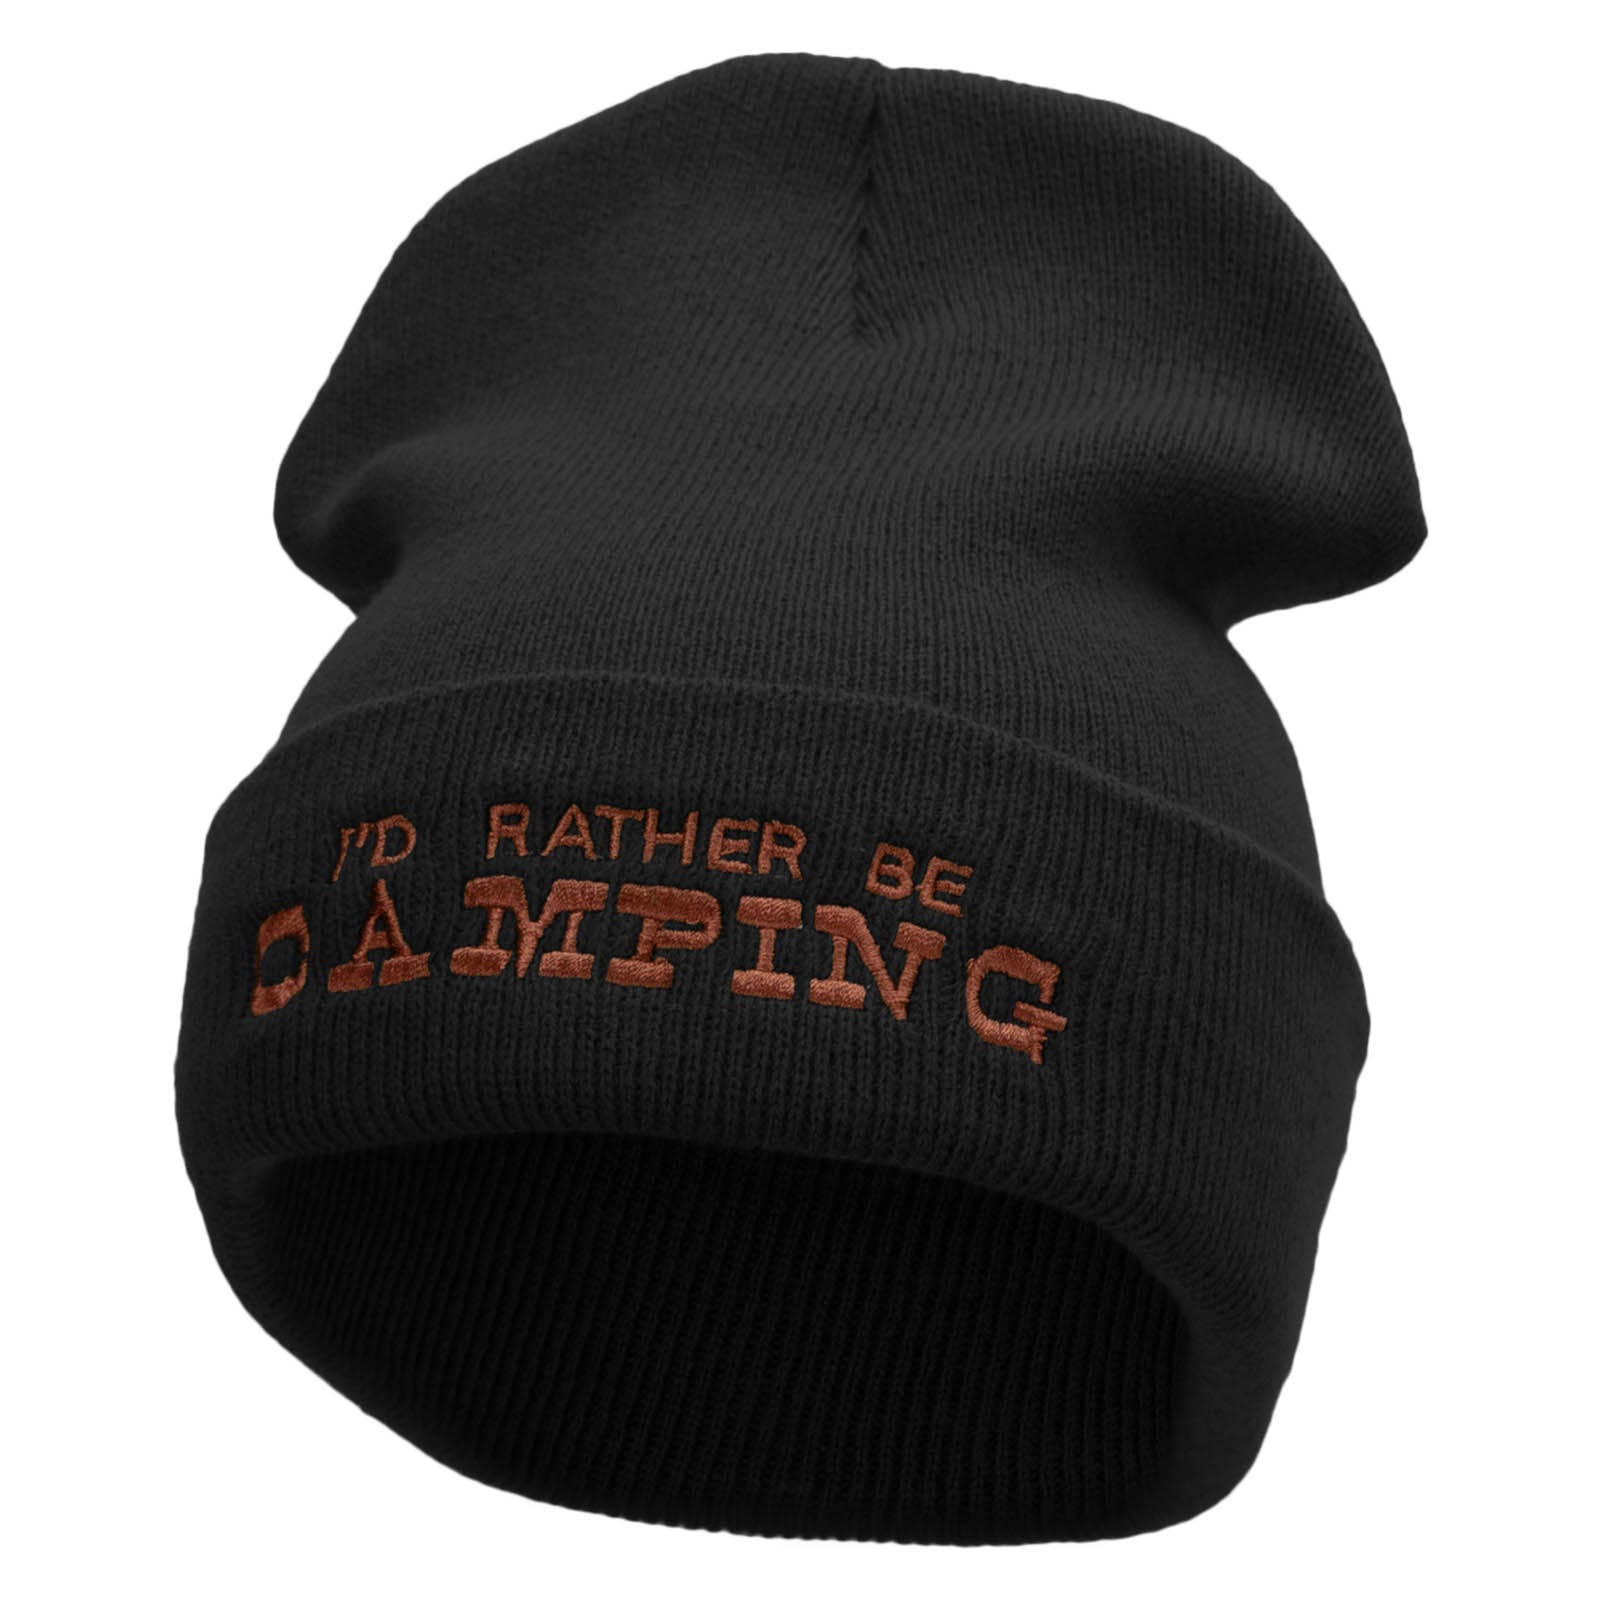 I&#039;d Rather Be Camping Embroidered 12 Inch Solid Long Beanie Made in USA - Black OSFM